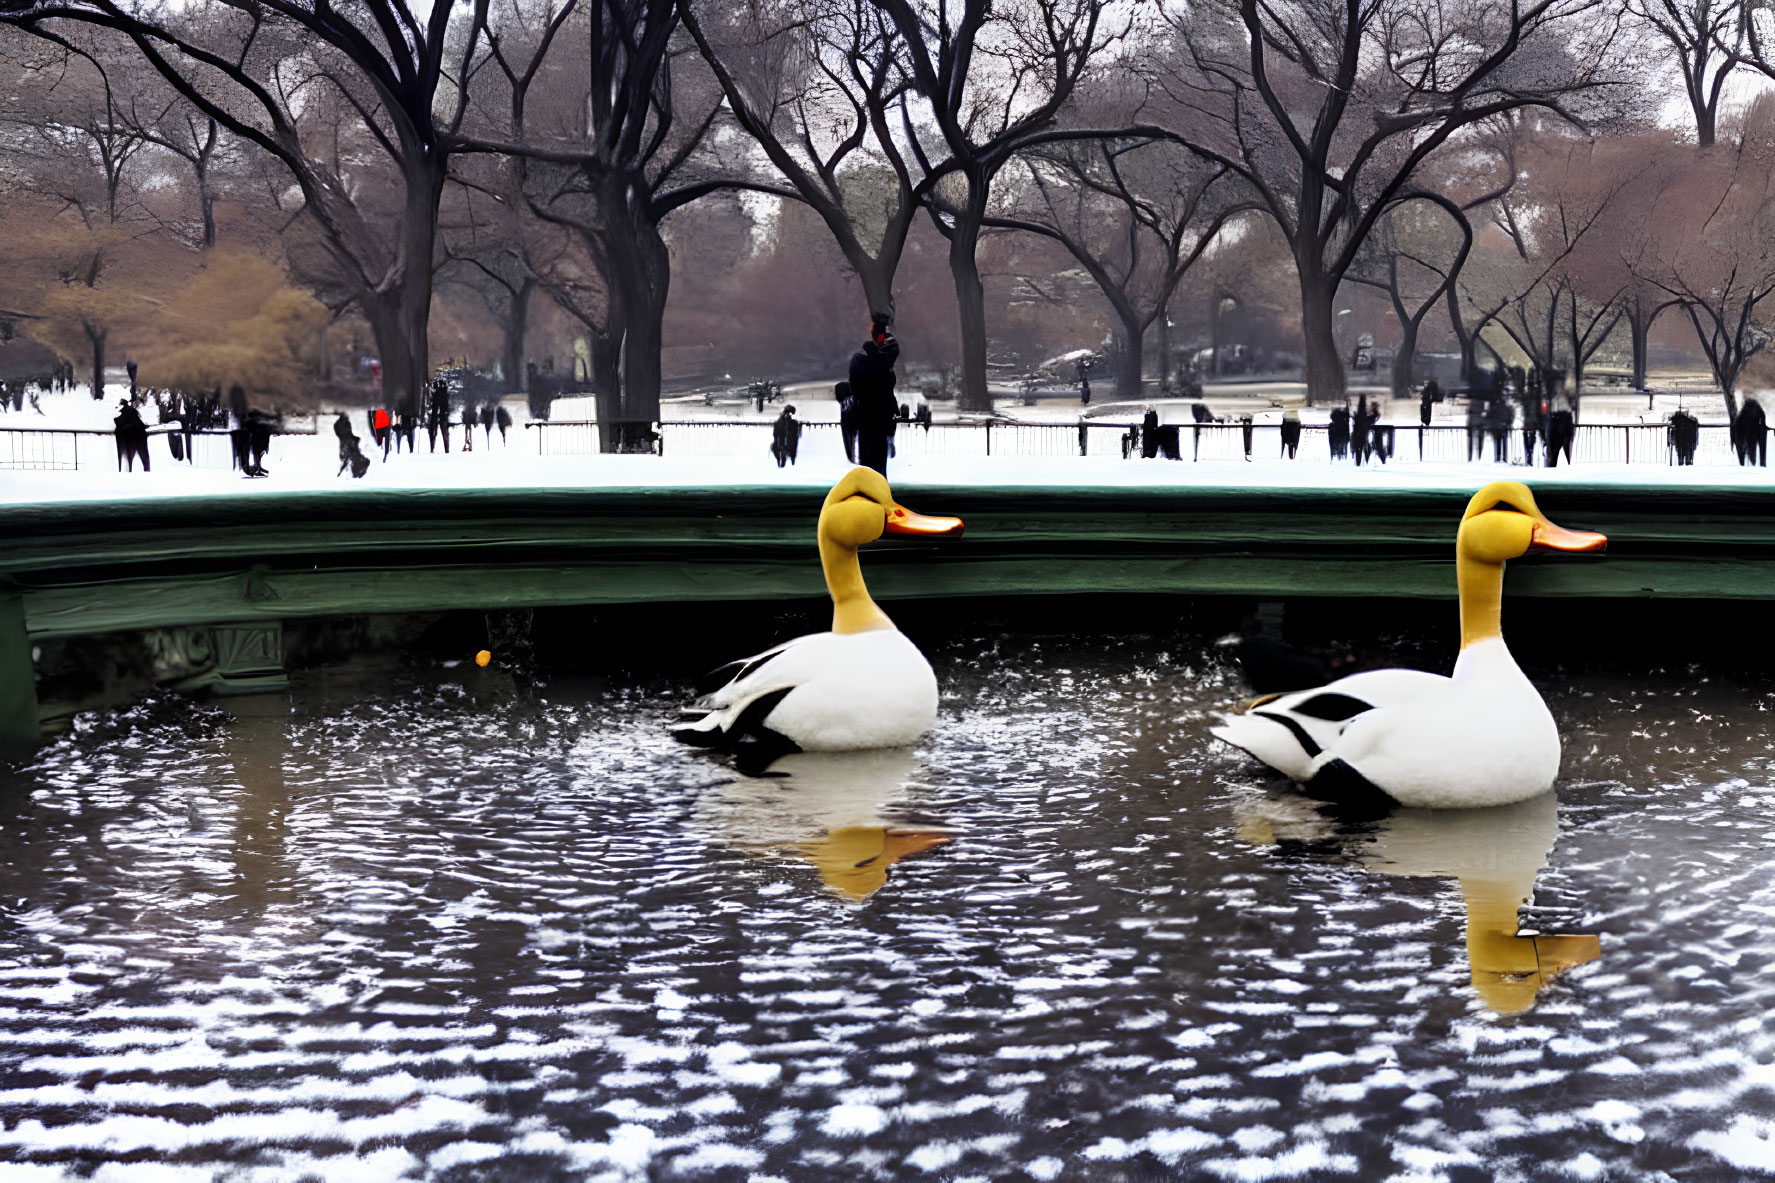 Large Duck Sculptures on Snow-Covered Water with People and Trees